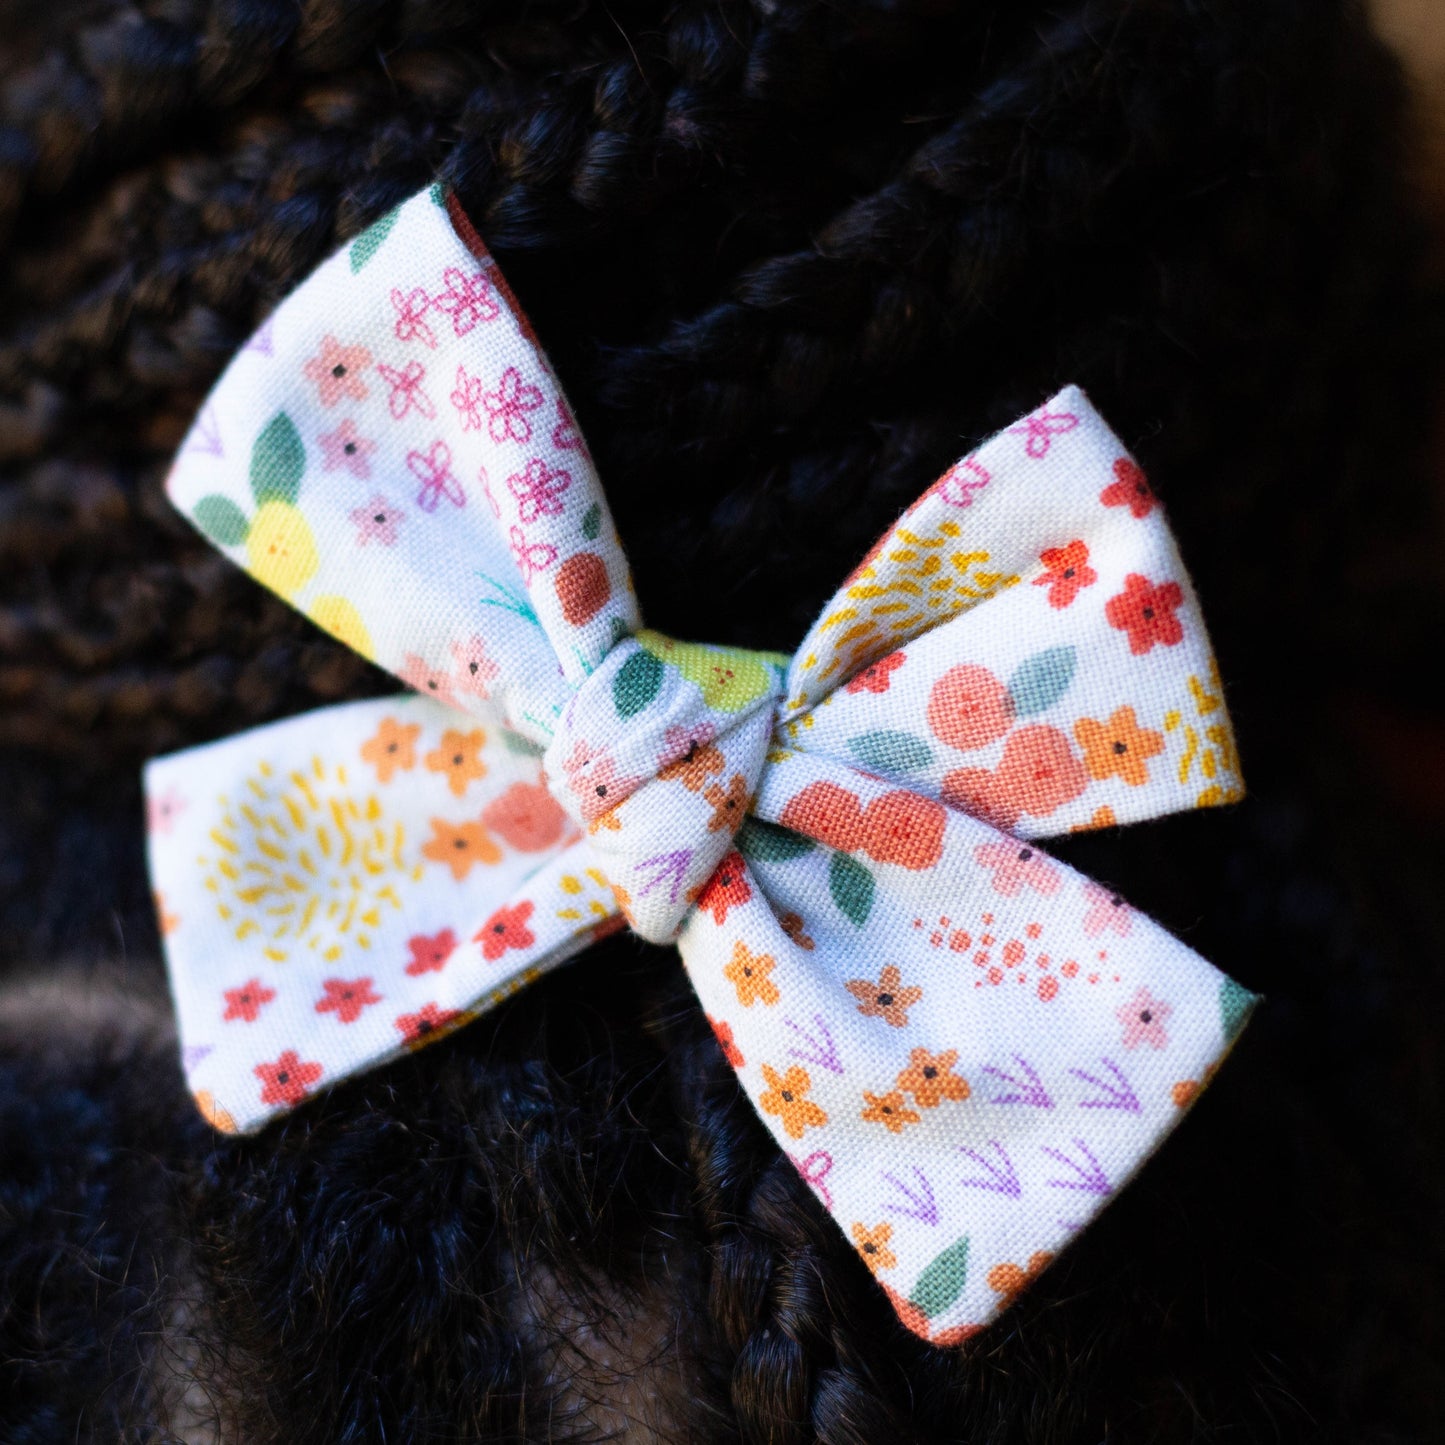 March Blooms florals hair bow in braided hair